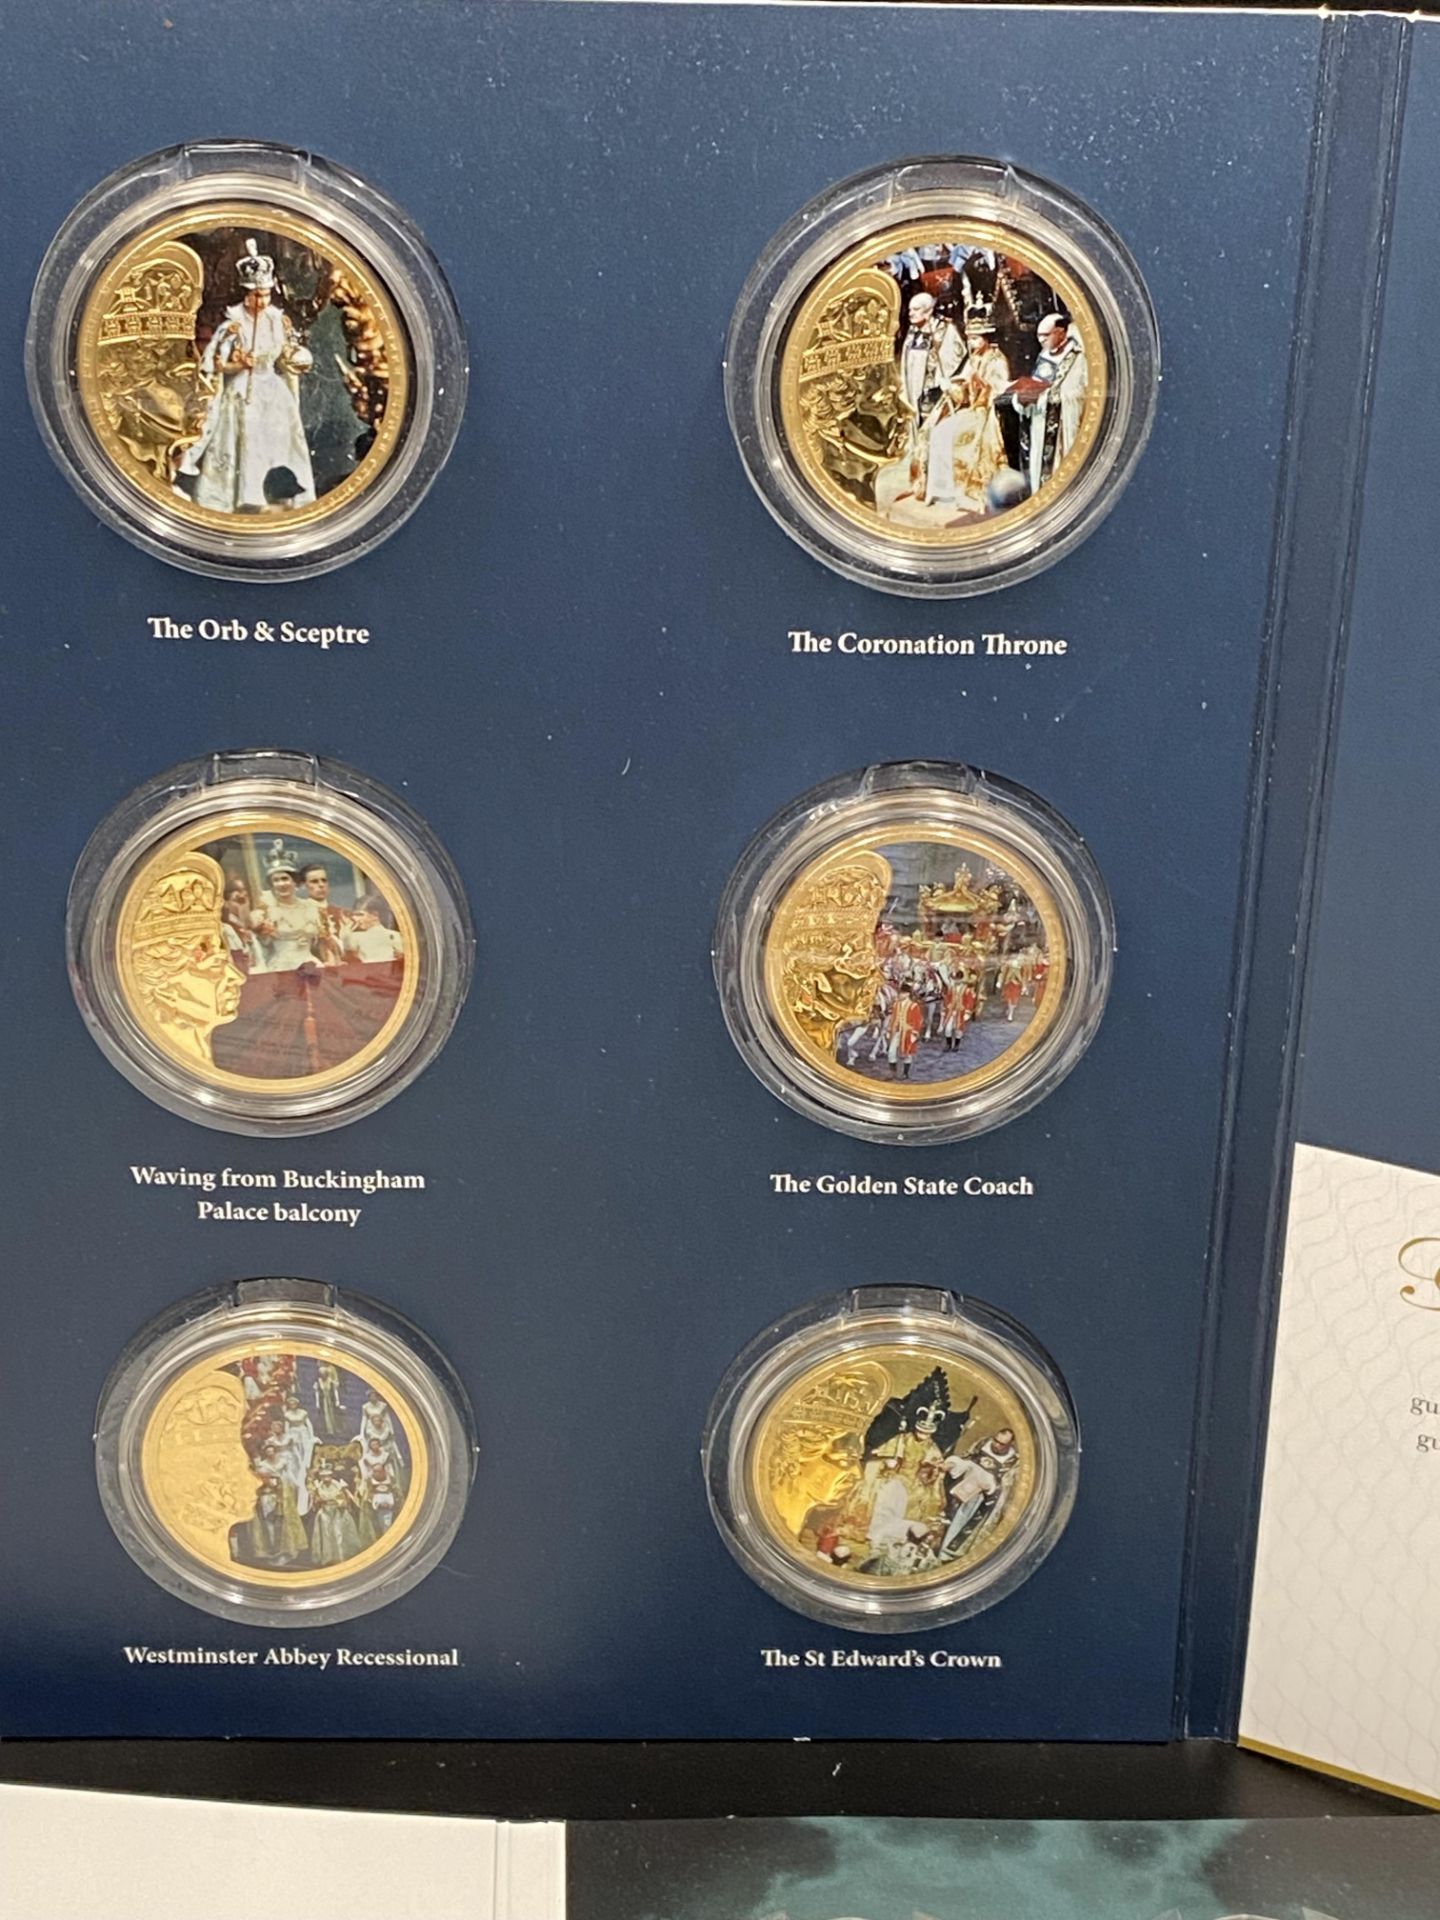 Queen's coronation 65th anniversary and Operation Overlord D-Day 75 coin collection - Image 2 of 10